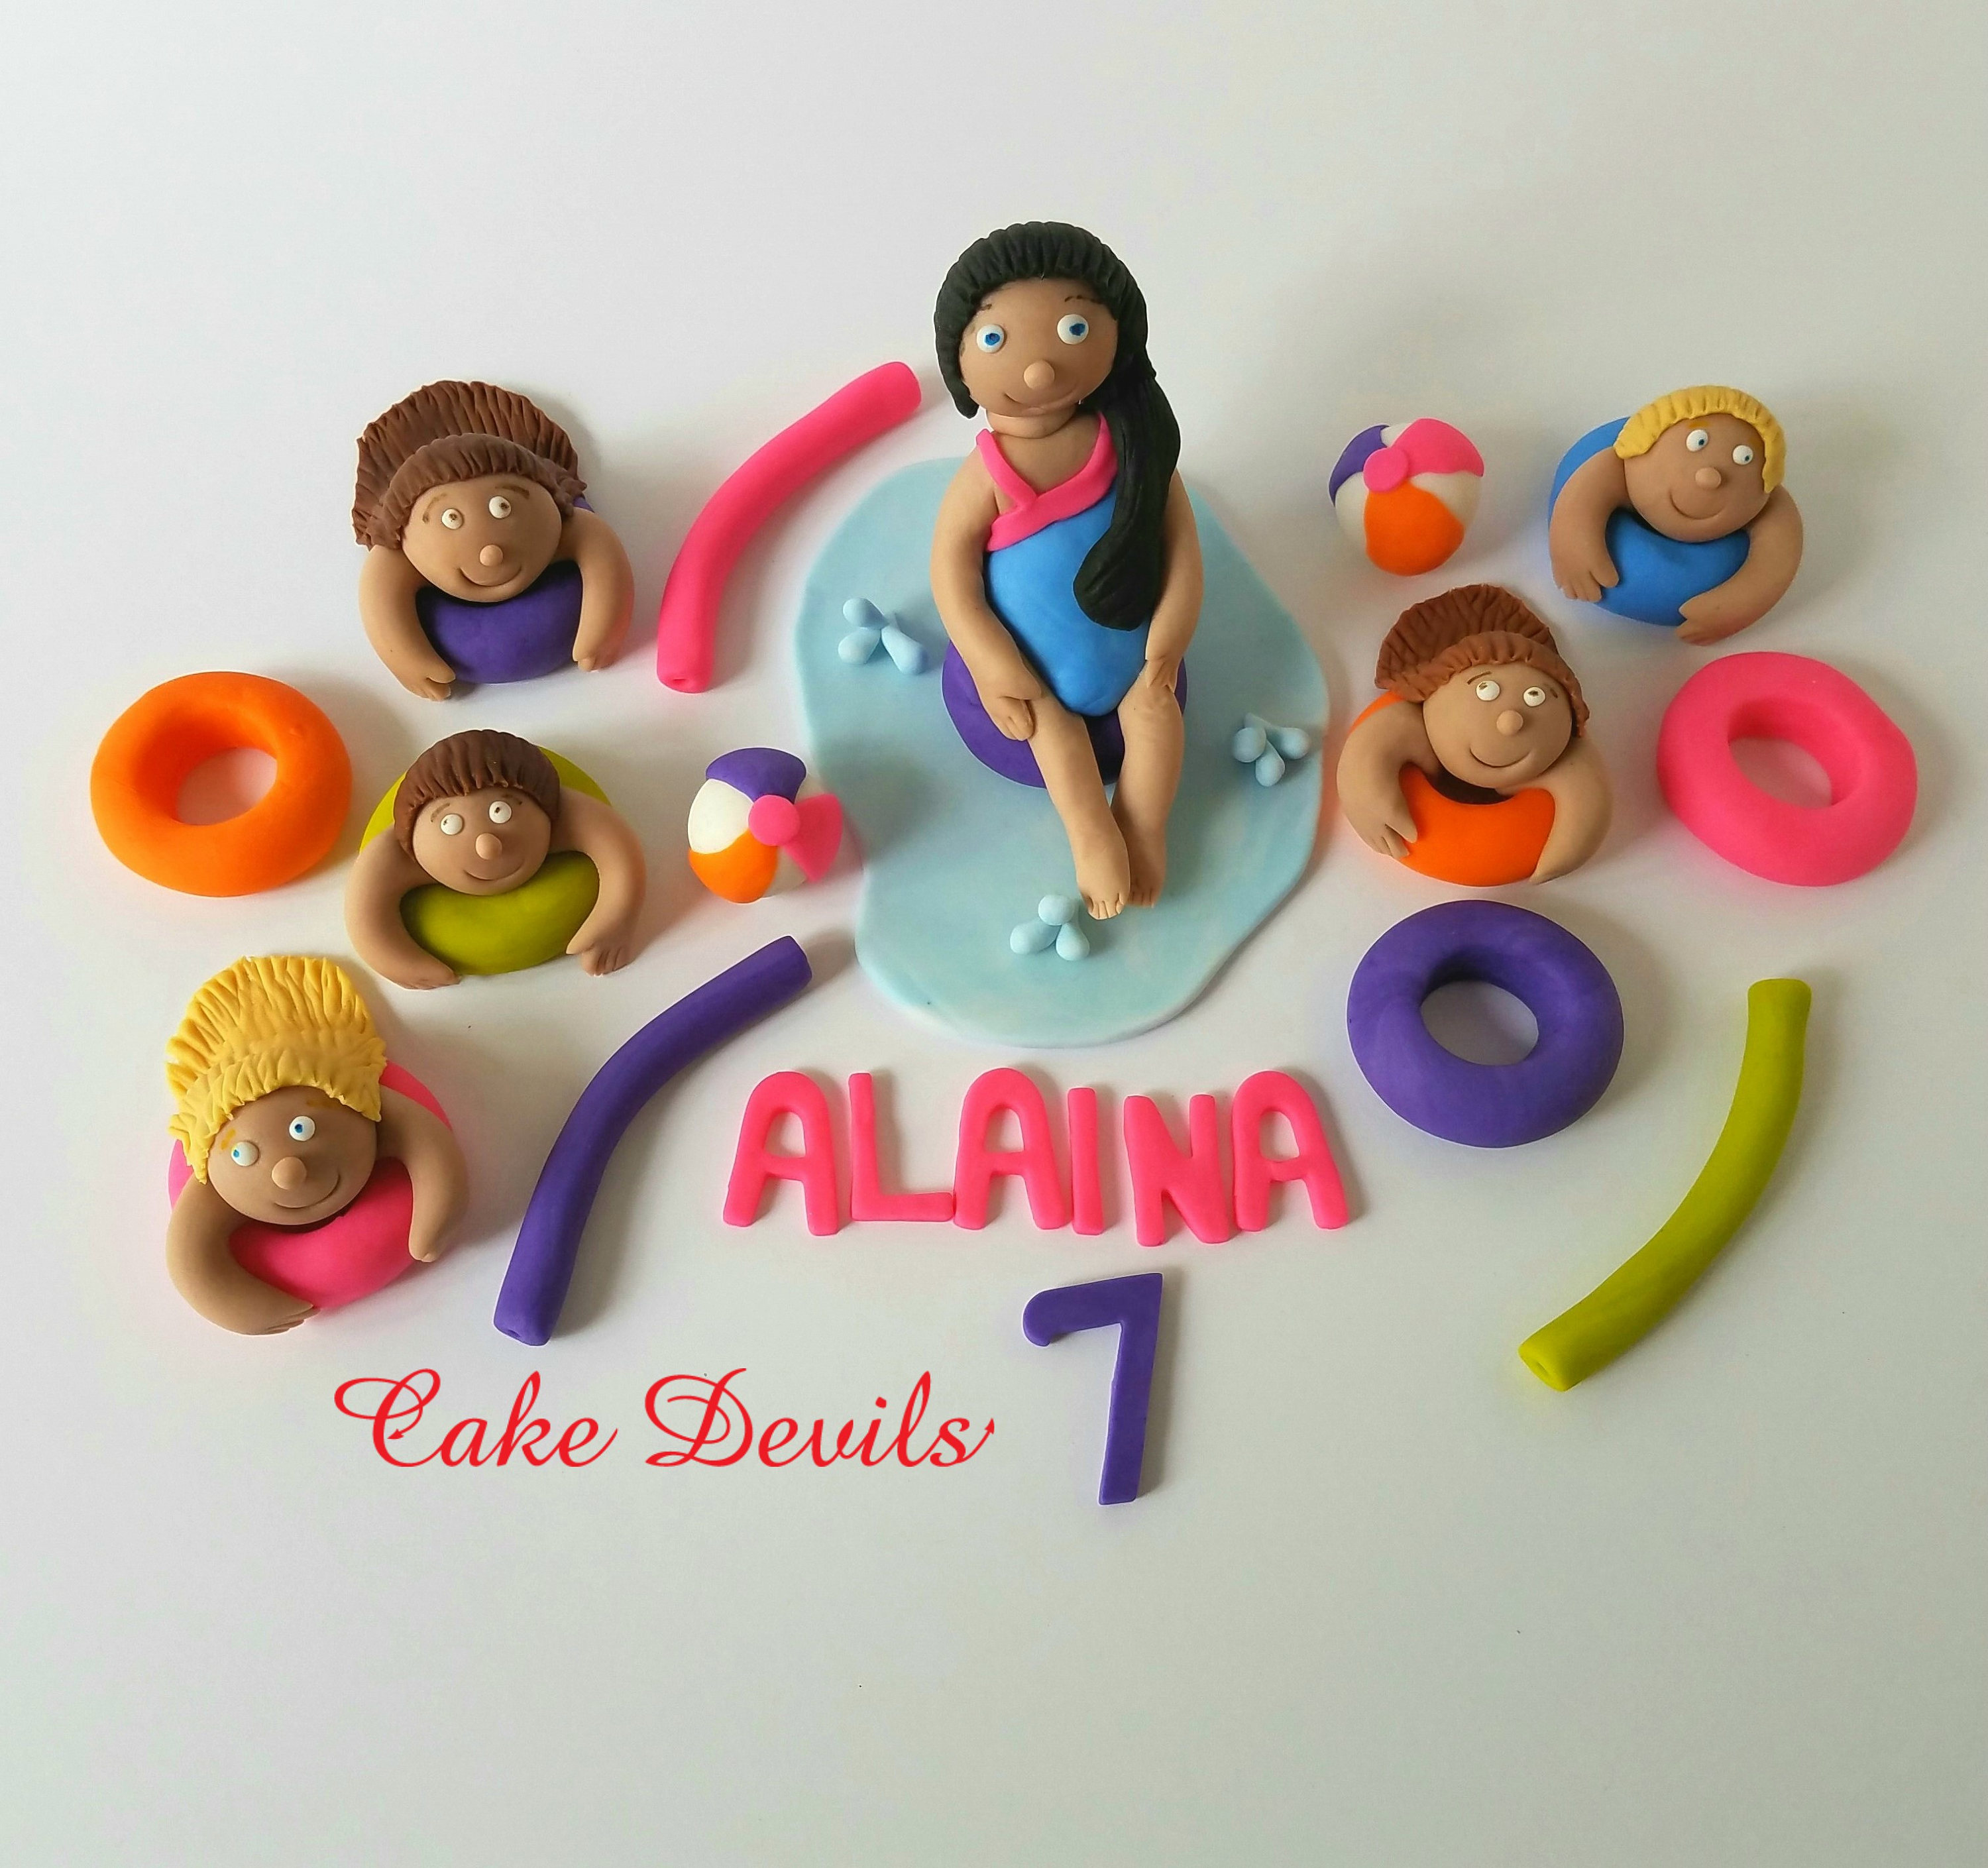 Pool Party Cubs - Cake Topper from @SofisCorner_Crafts